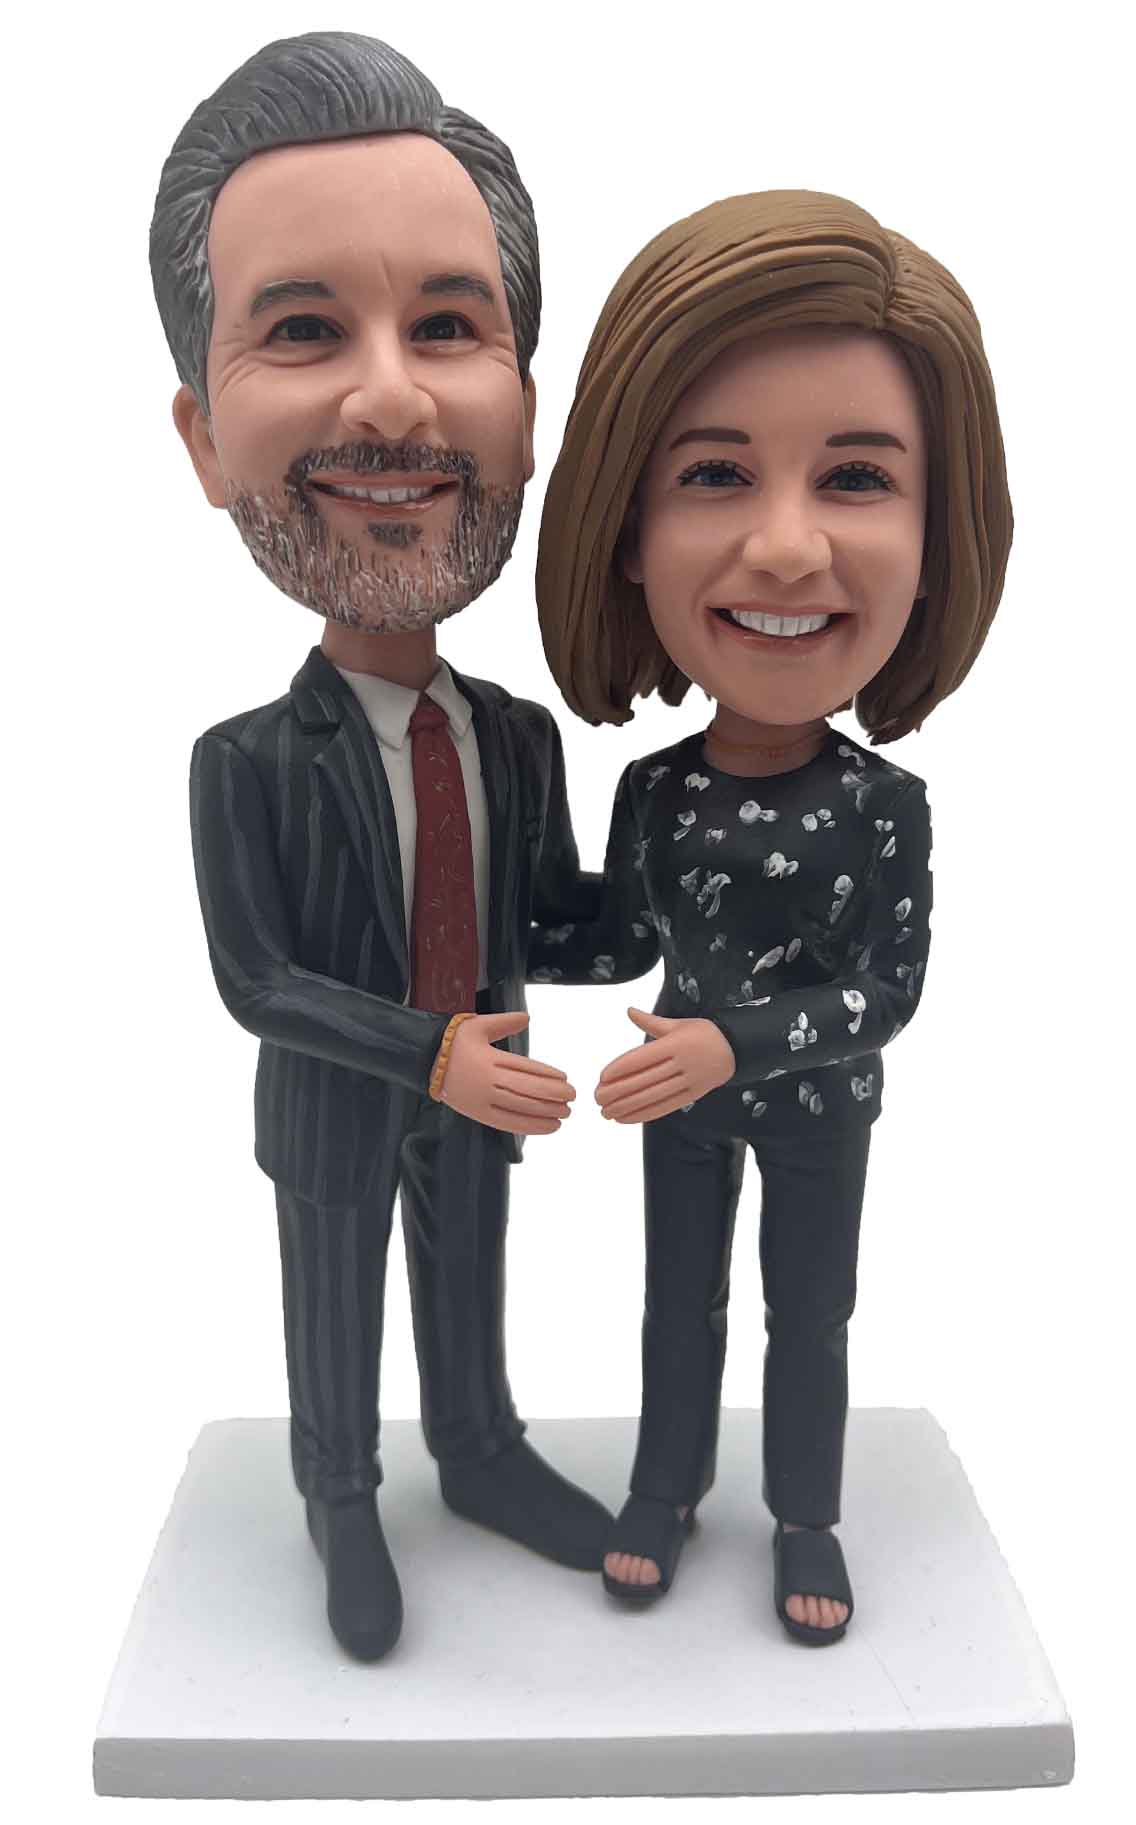 Custom Personalized cake toppers for parents wedding figurines made from photos